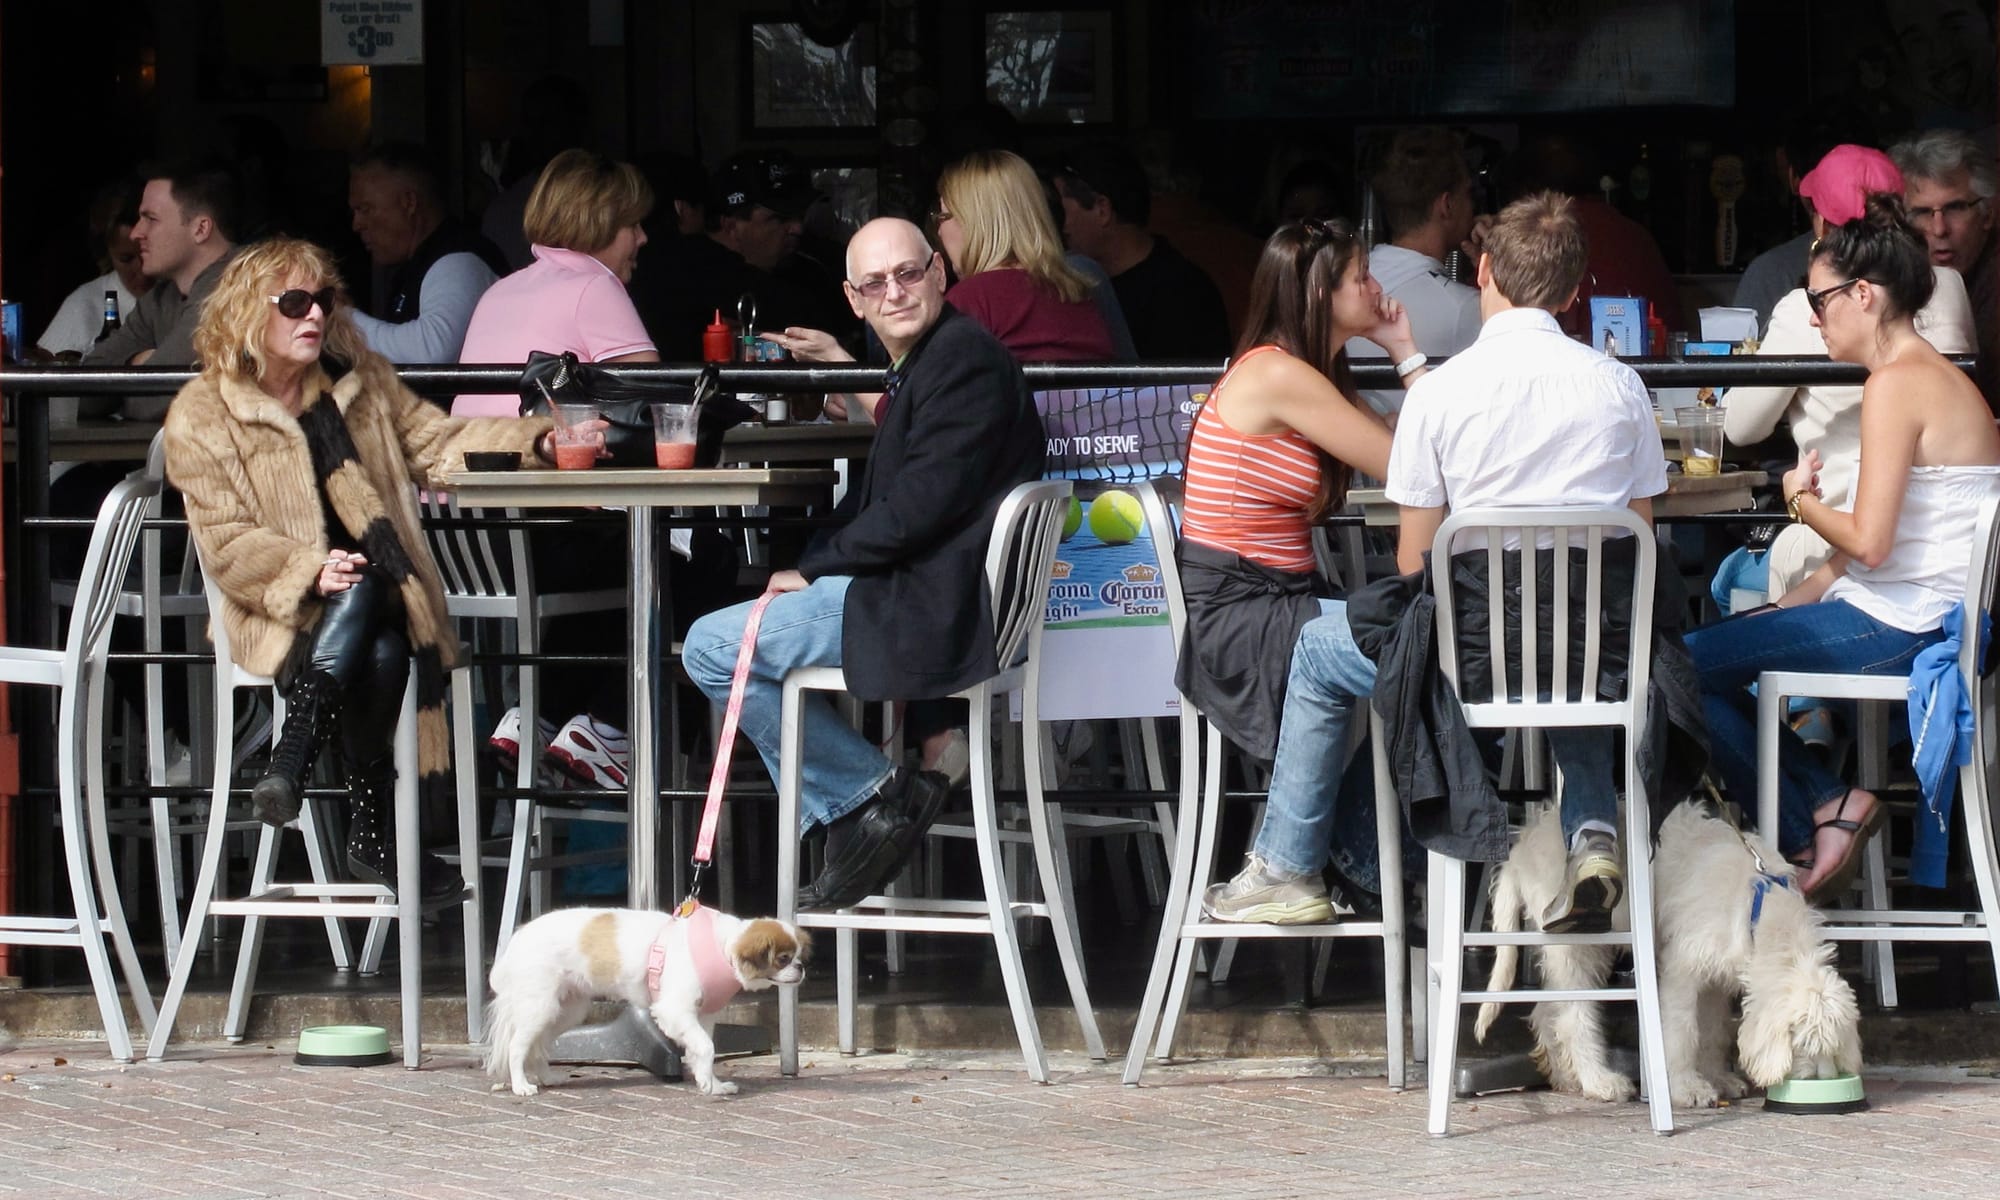 The Delray Beach Story - How Pets Add to Social Life